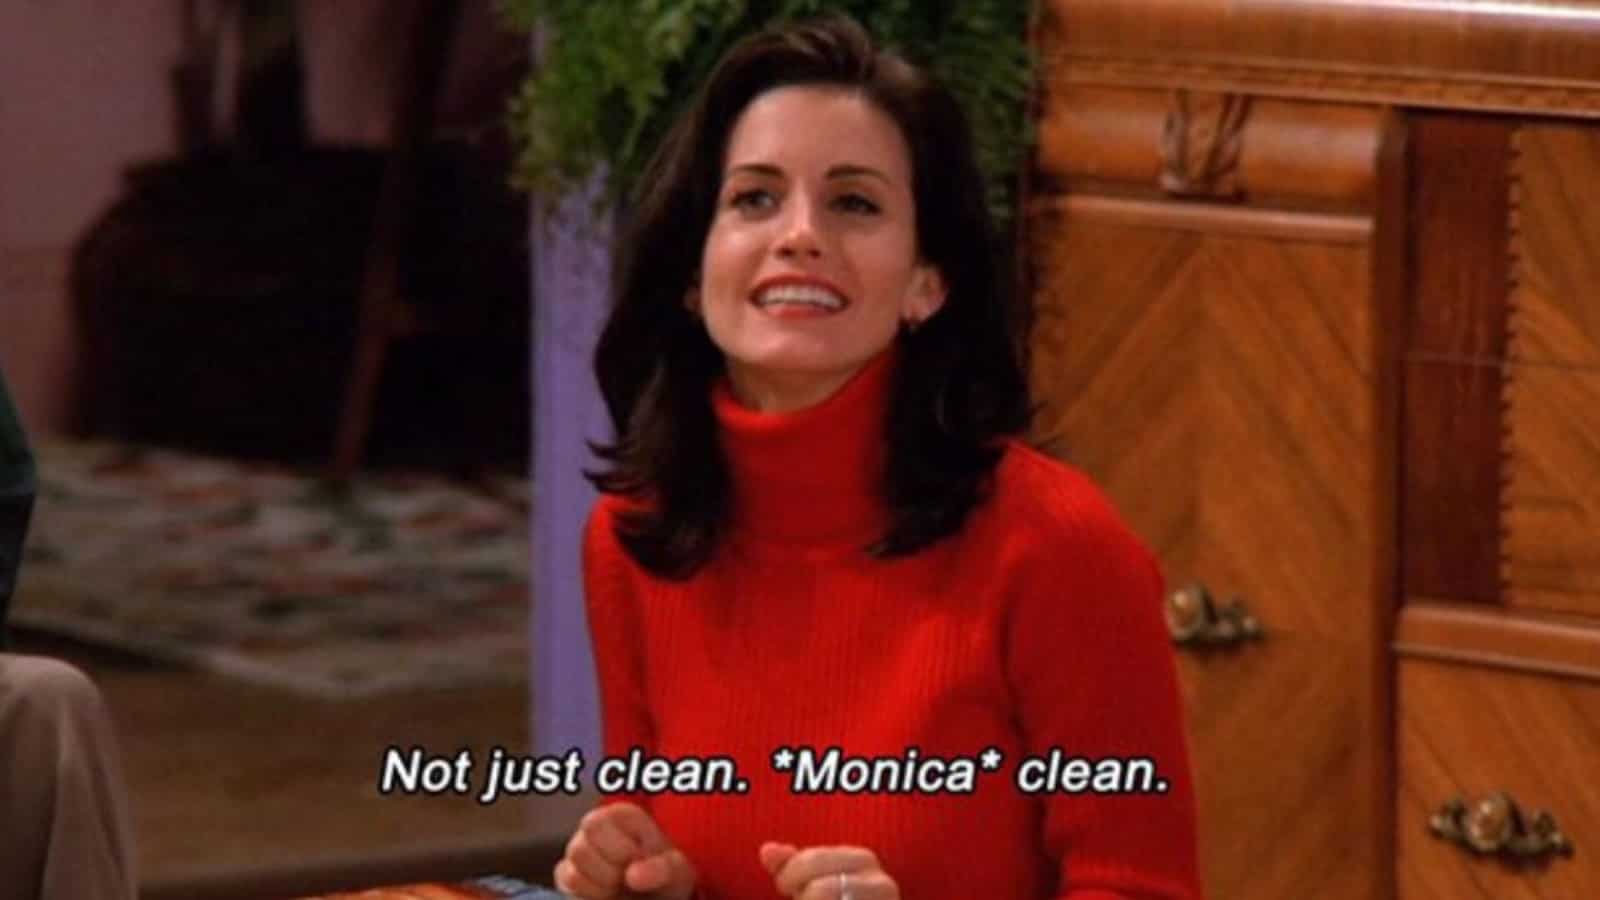 All the times Monica Geller proved to be a sucker for cleanliness